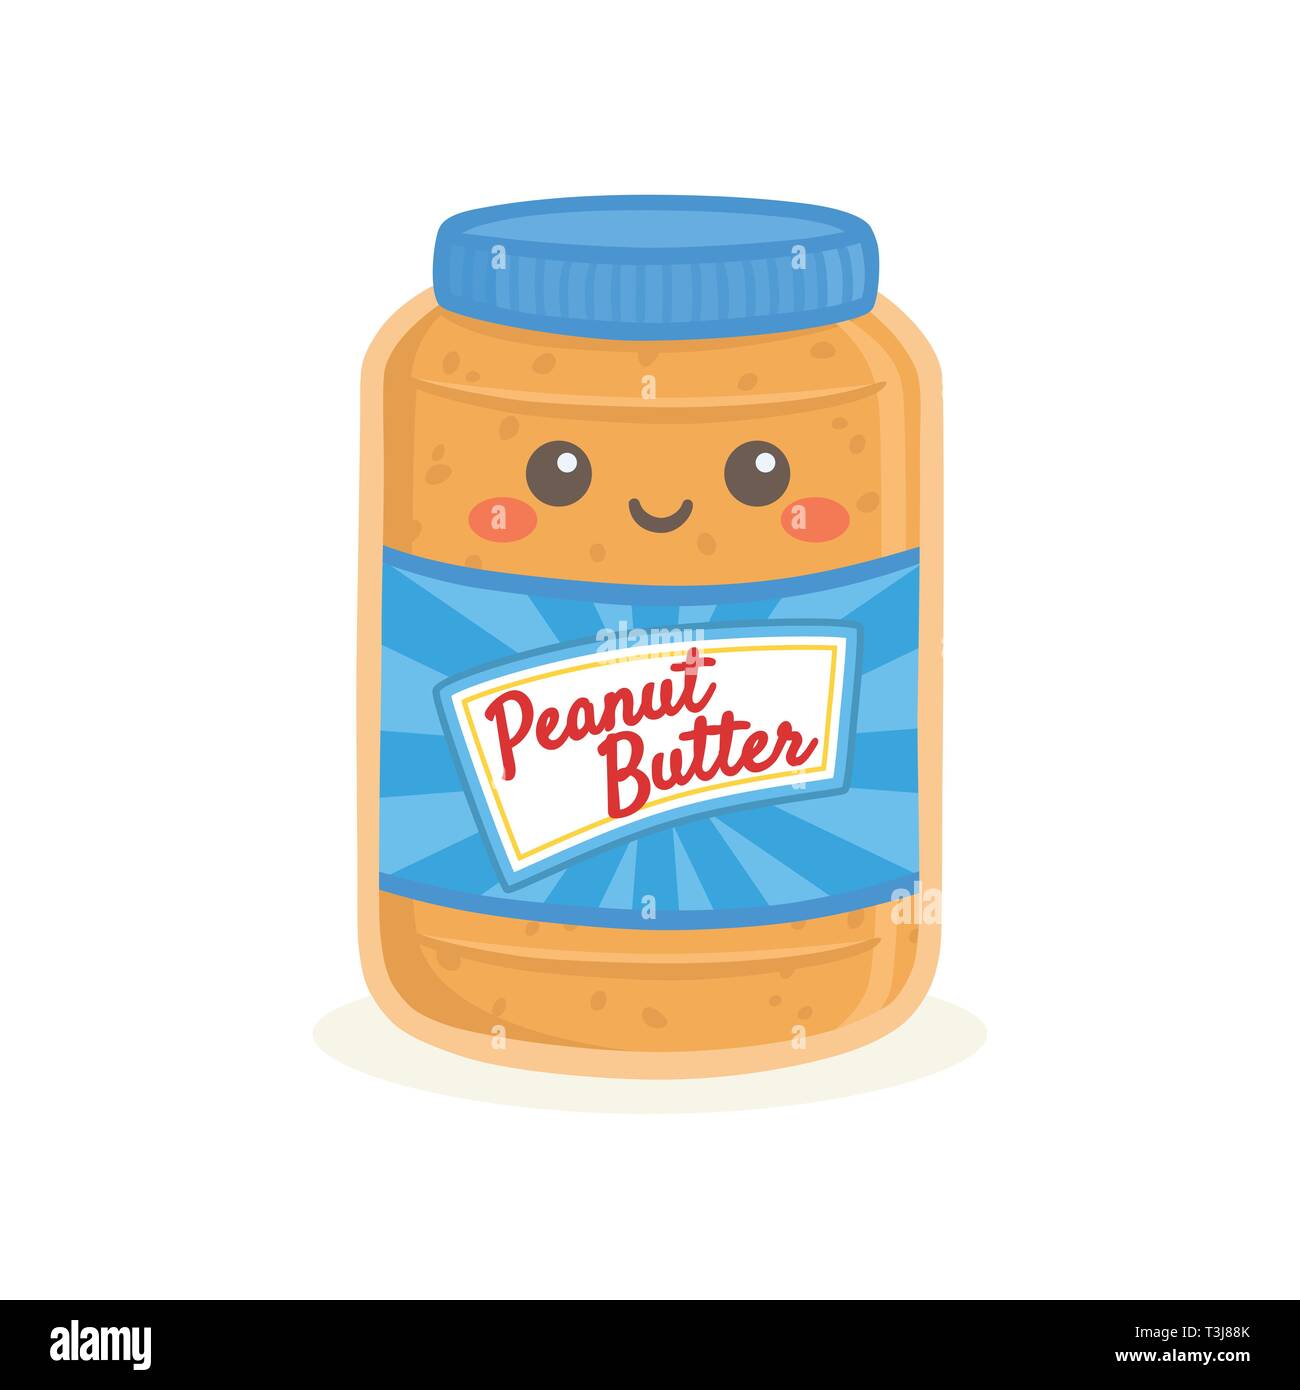 Download Cartoon Illustration Peanut Butter Jar High Resolution Stock Photography And Images Alamy Yellowimages Mockups